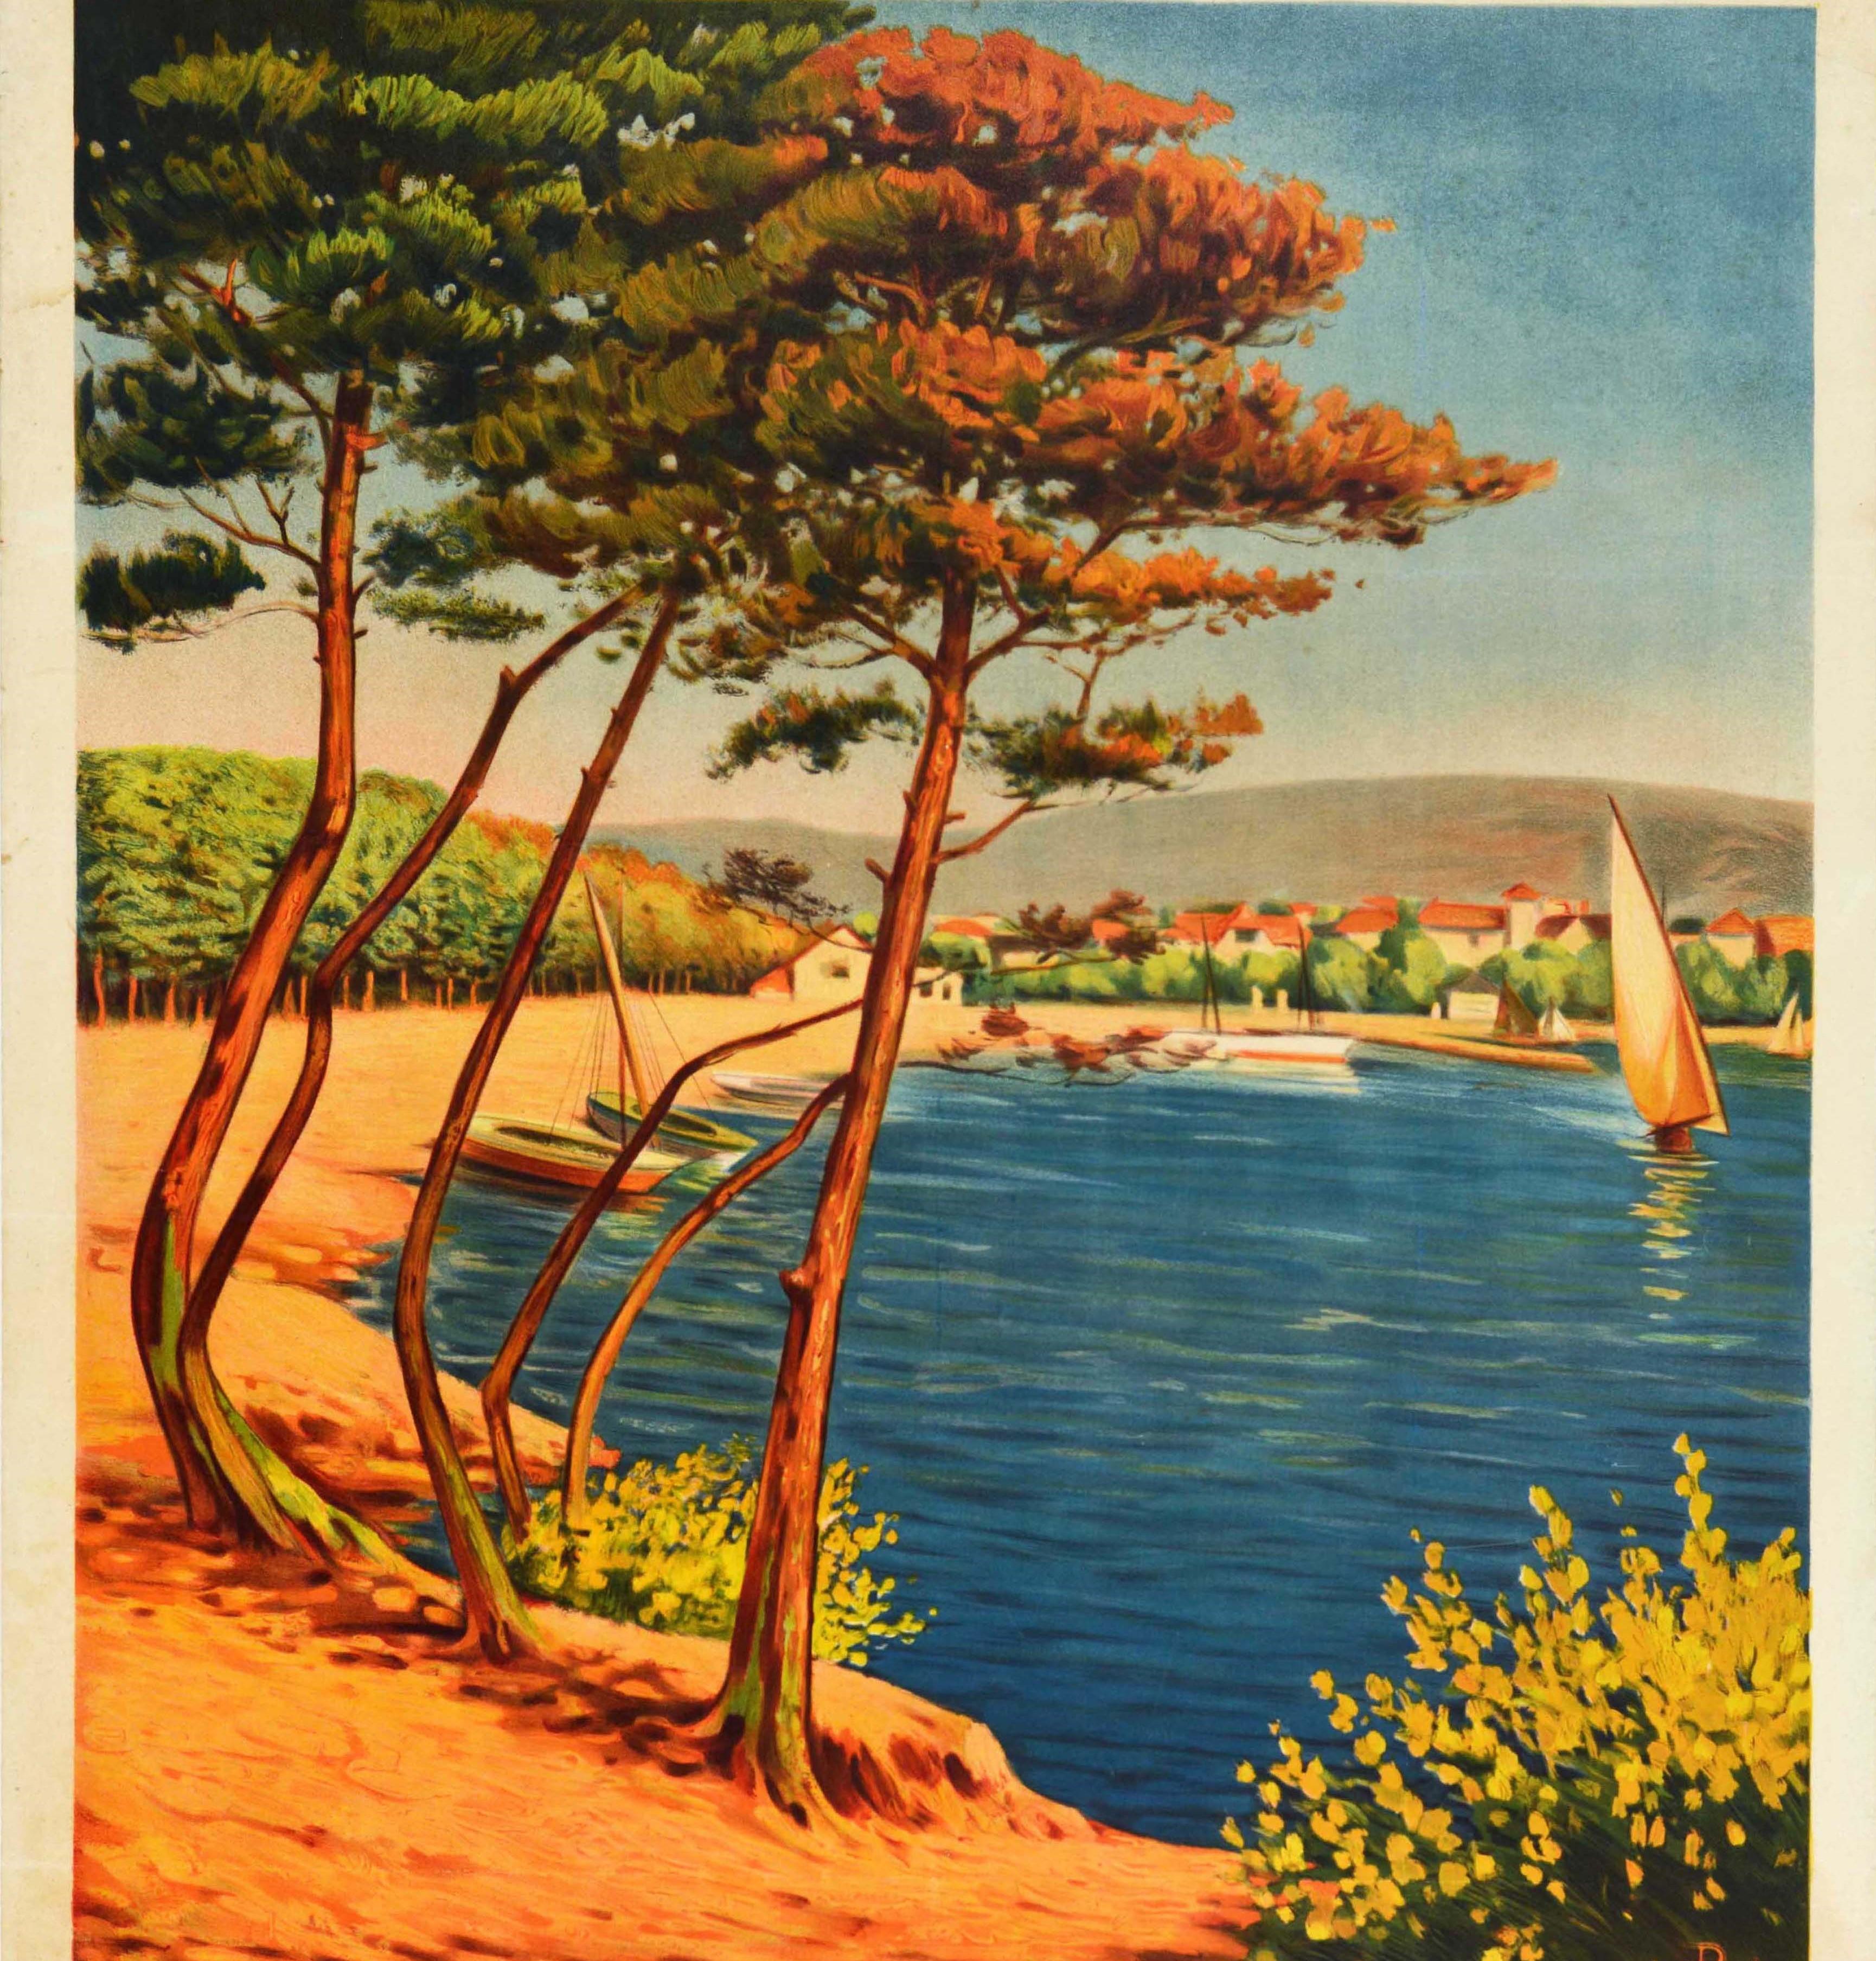 Original antique travel poster for the seaside resort village of Carry Le Rouet located 25km from Marseille featuring a scenic view of sailing boats at sea with trees in the foreground and hills in the distance behind the houses on the other side of